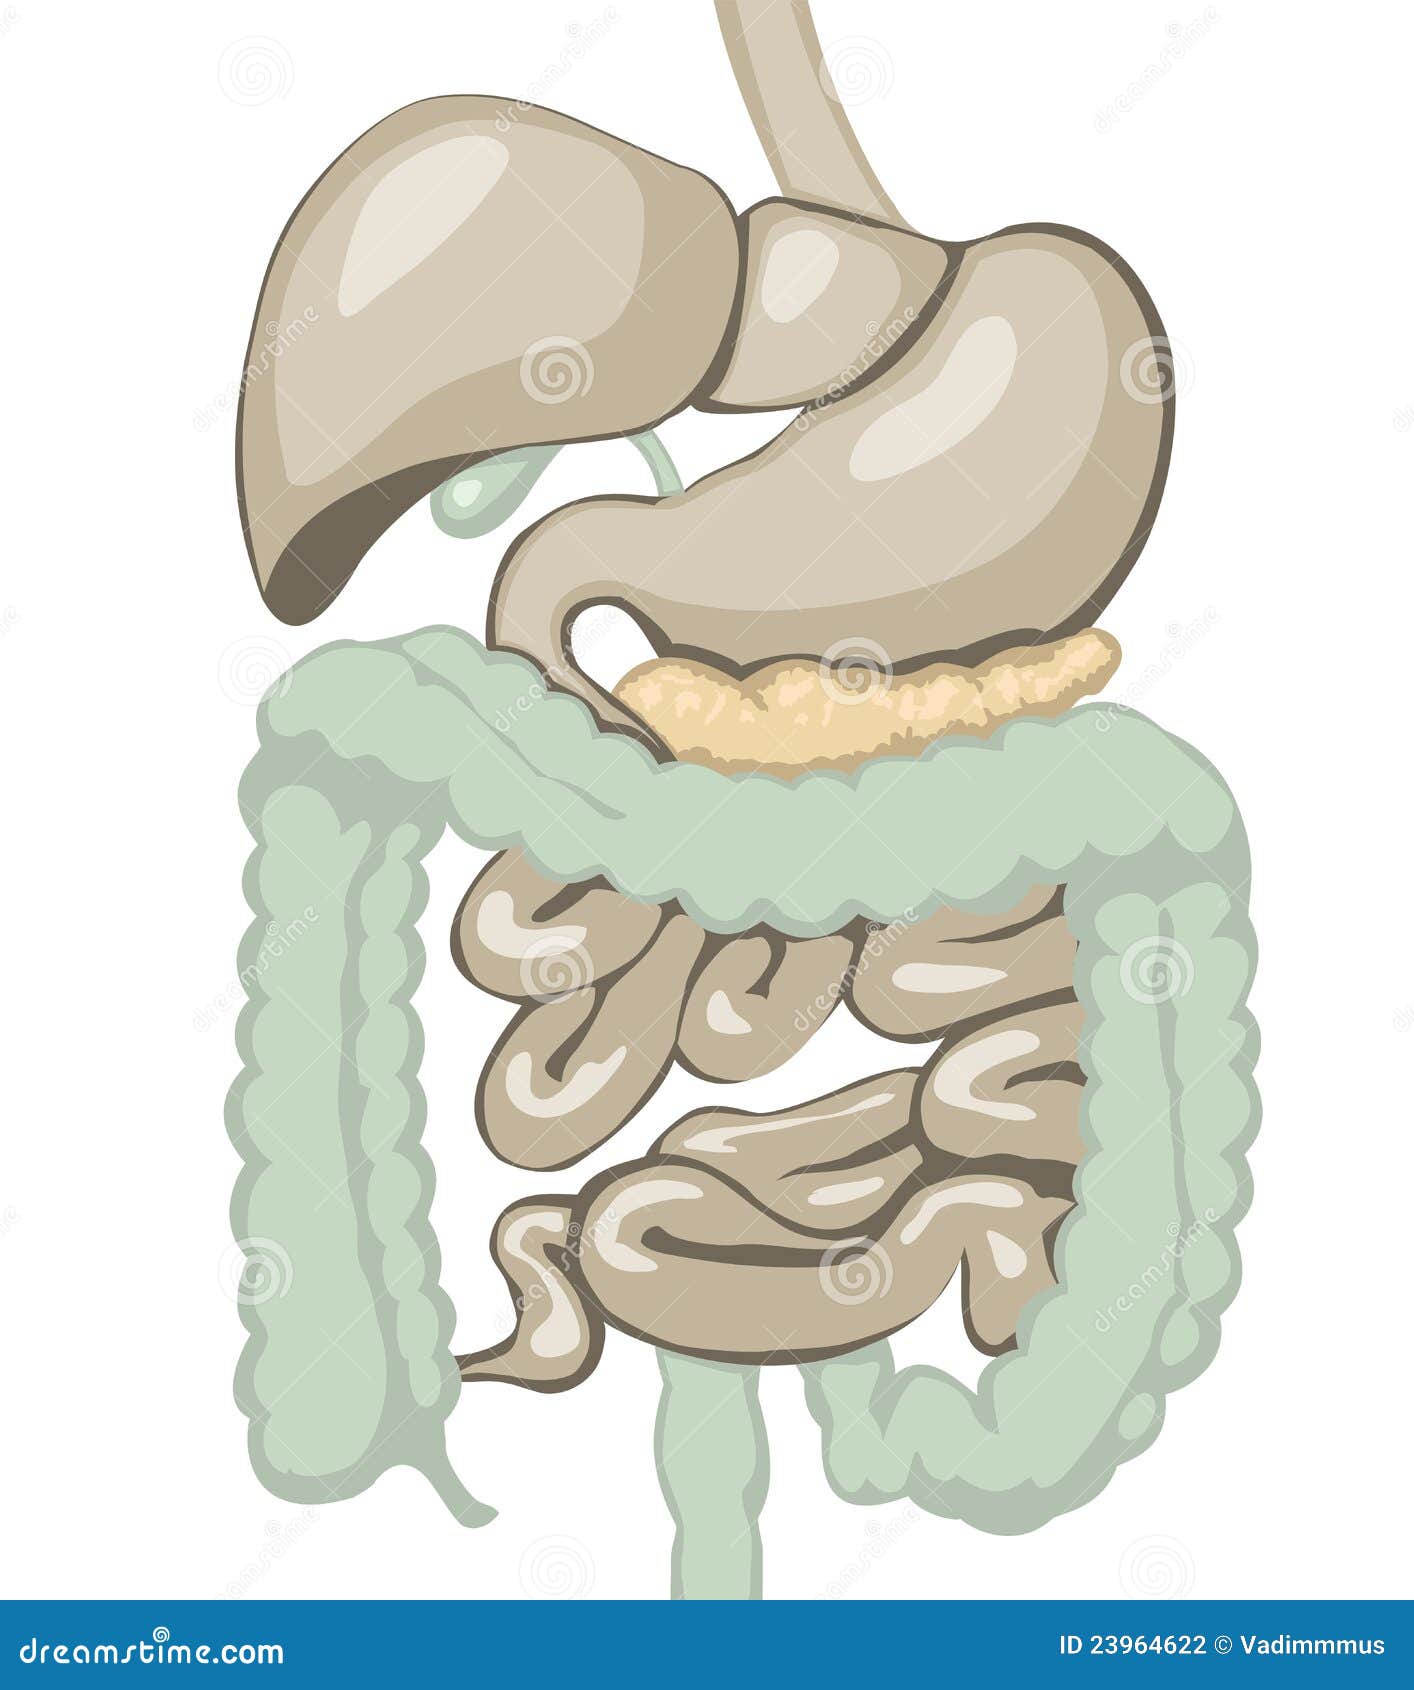 Digestive System Stock Photography - Image: 23964622